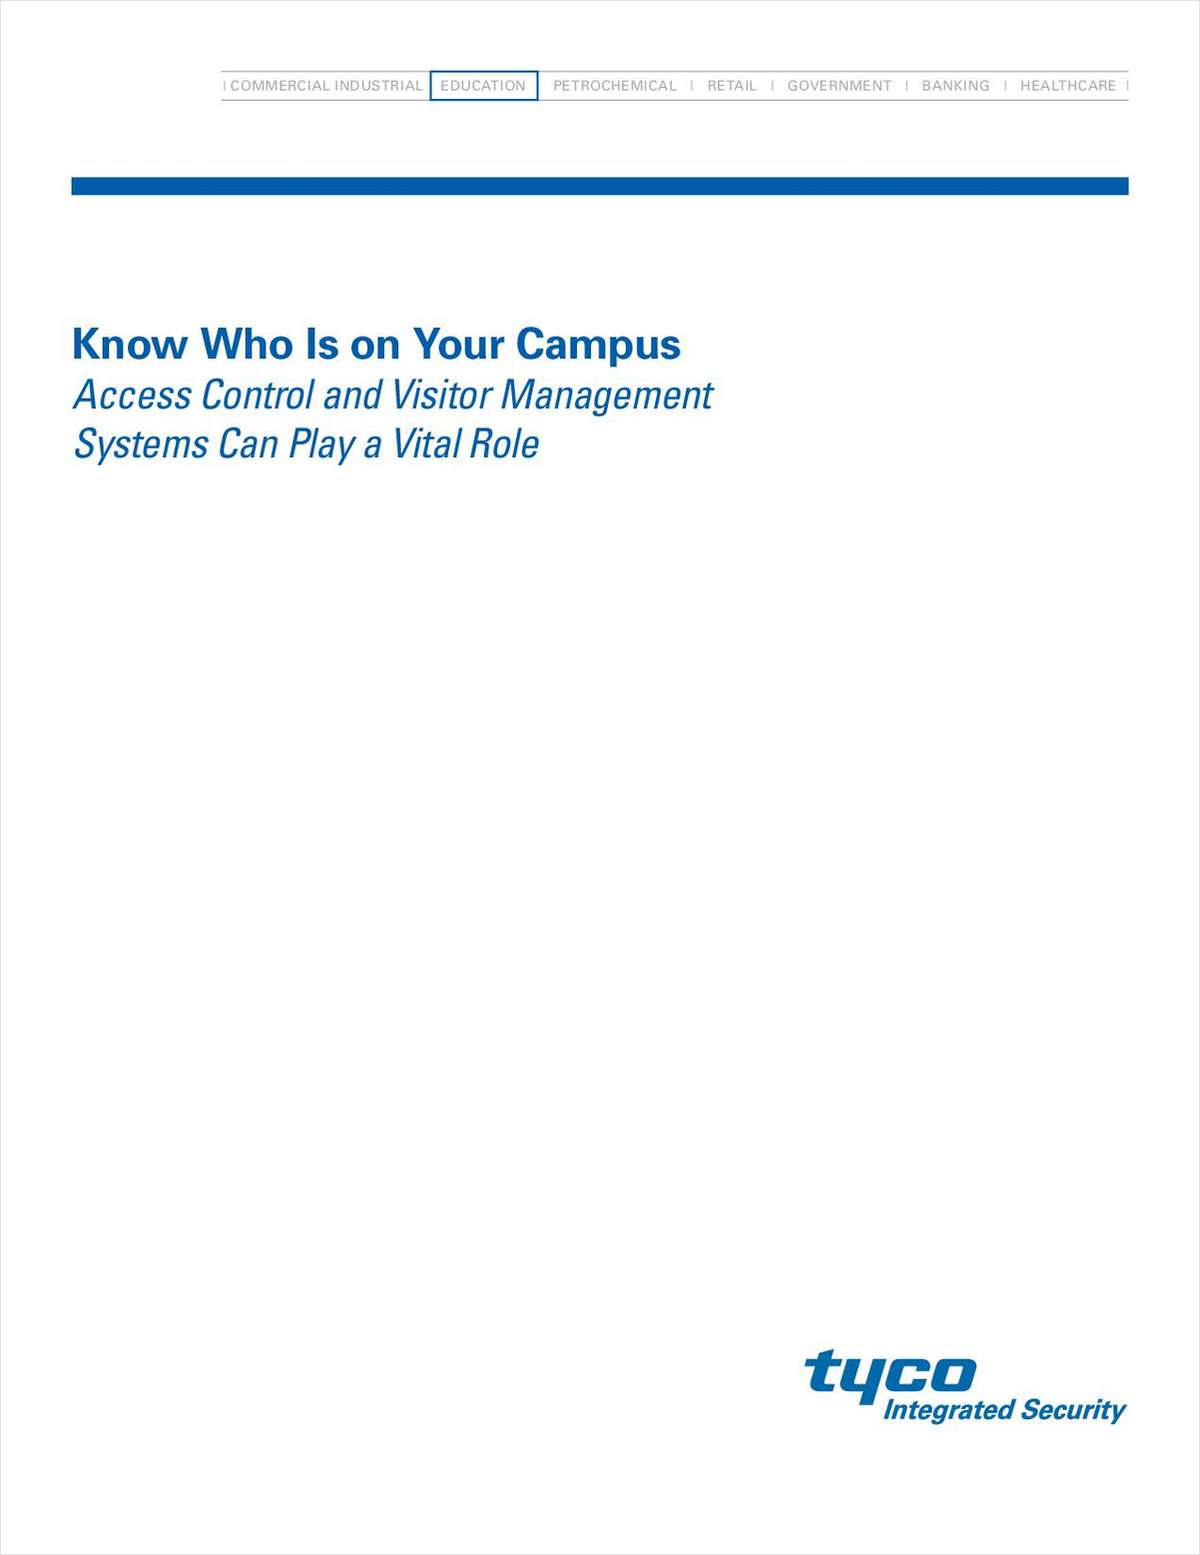 Campus Safety: Access Control and Visitor Management Systems are Vital